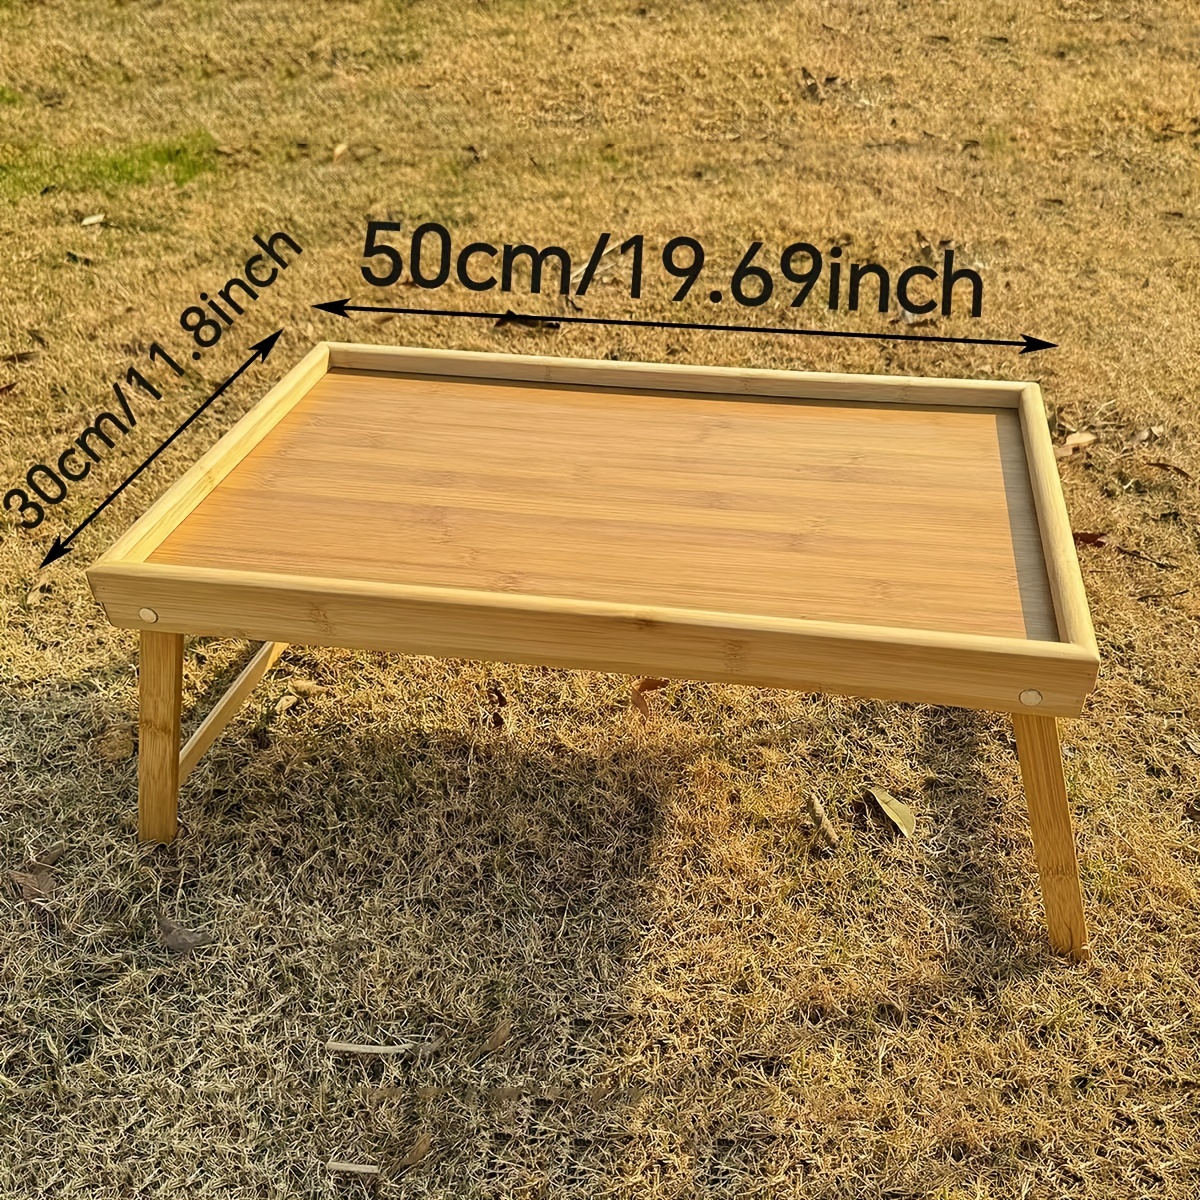 1pc folding table creative dinner plate with foot tray table for lazy bed casual computer table outdoor picnic camping table randomly   table on the sofa gift for fathers day mothers day 2